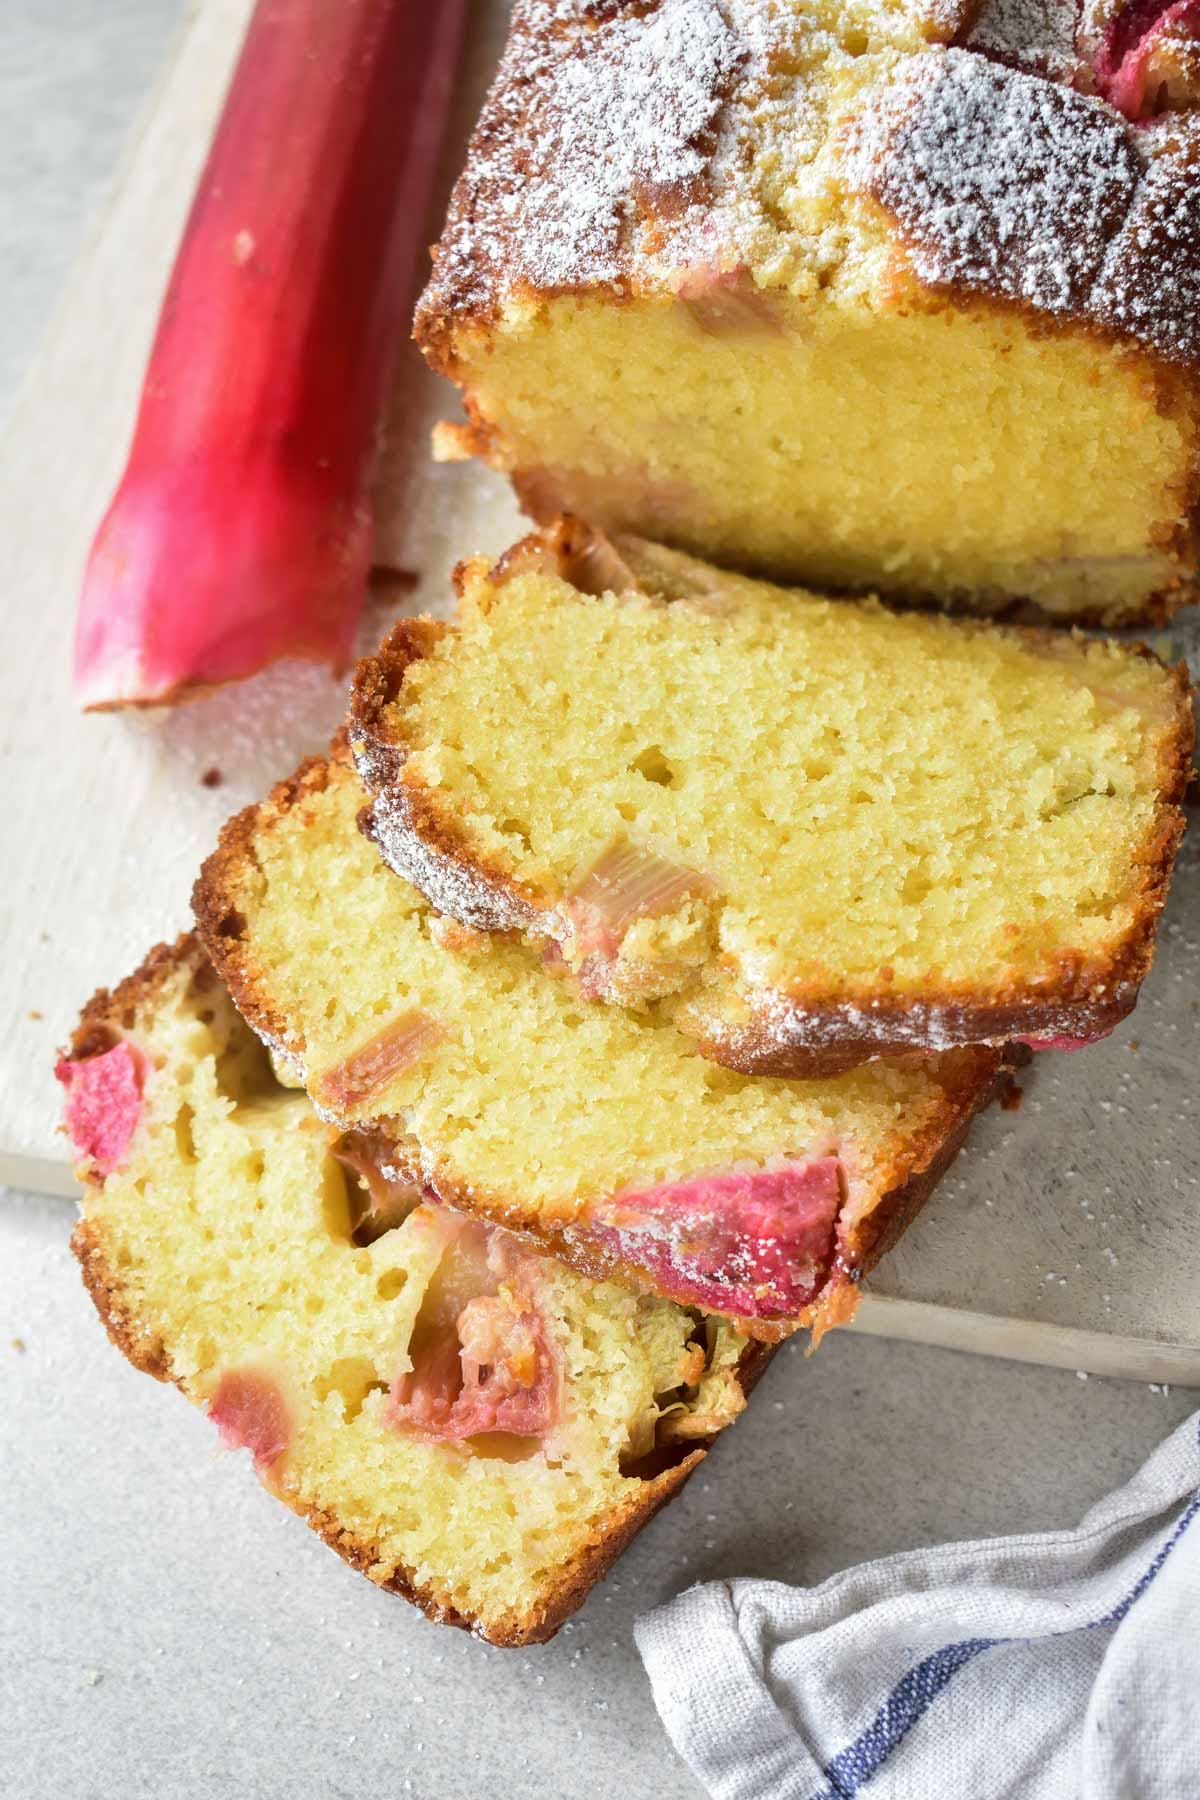 Rhubarb cake cut into slices on a white wooden board